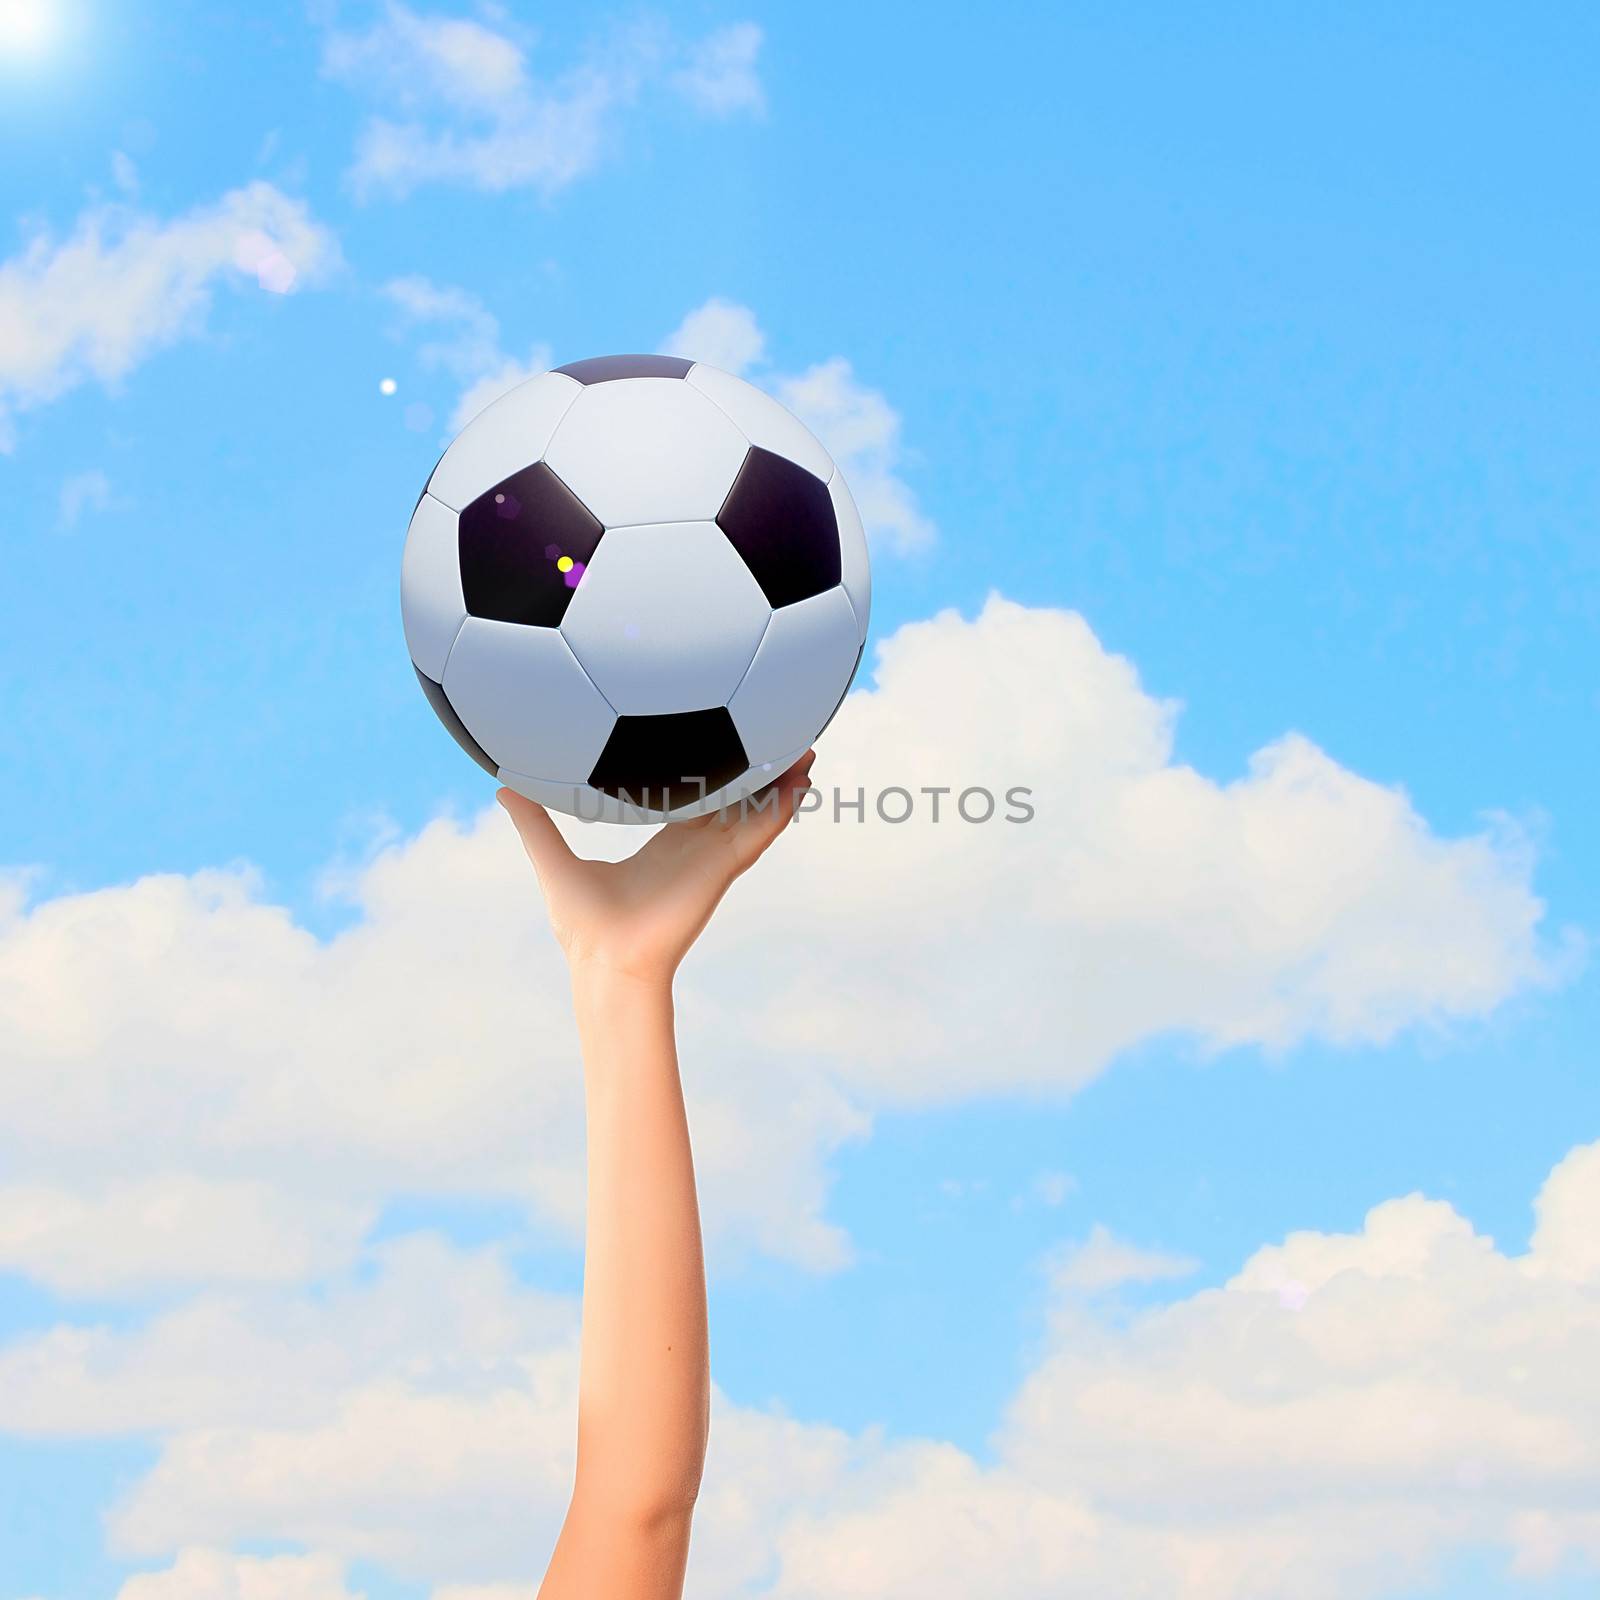 Soccer ball in hand by sergey_nivens